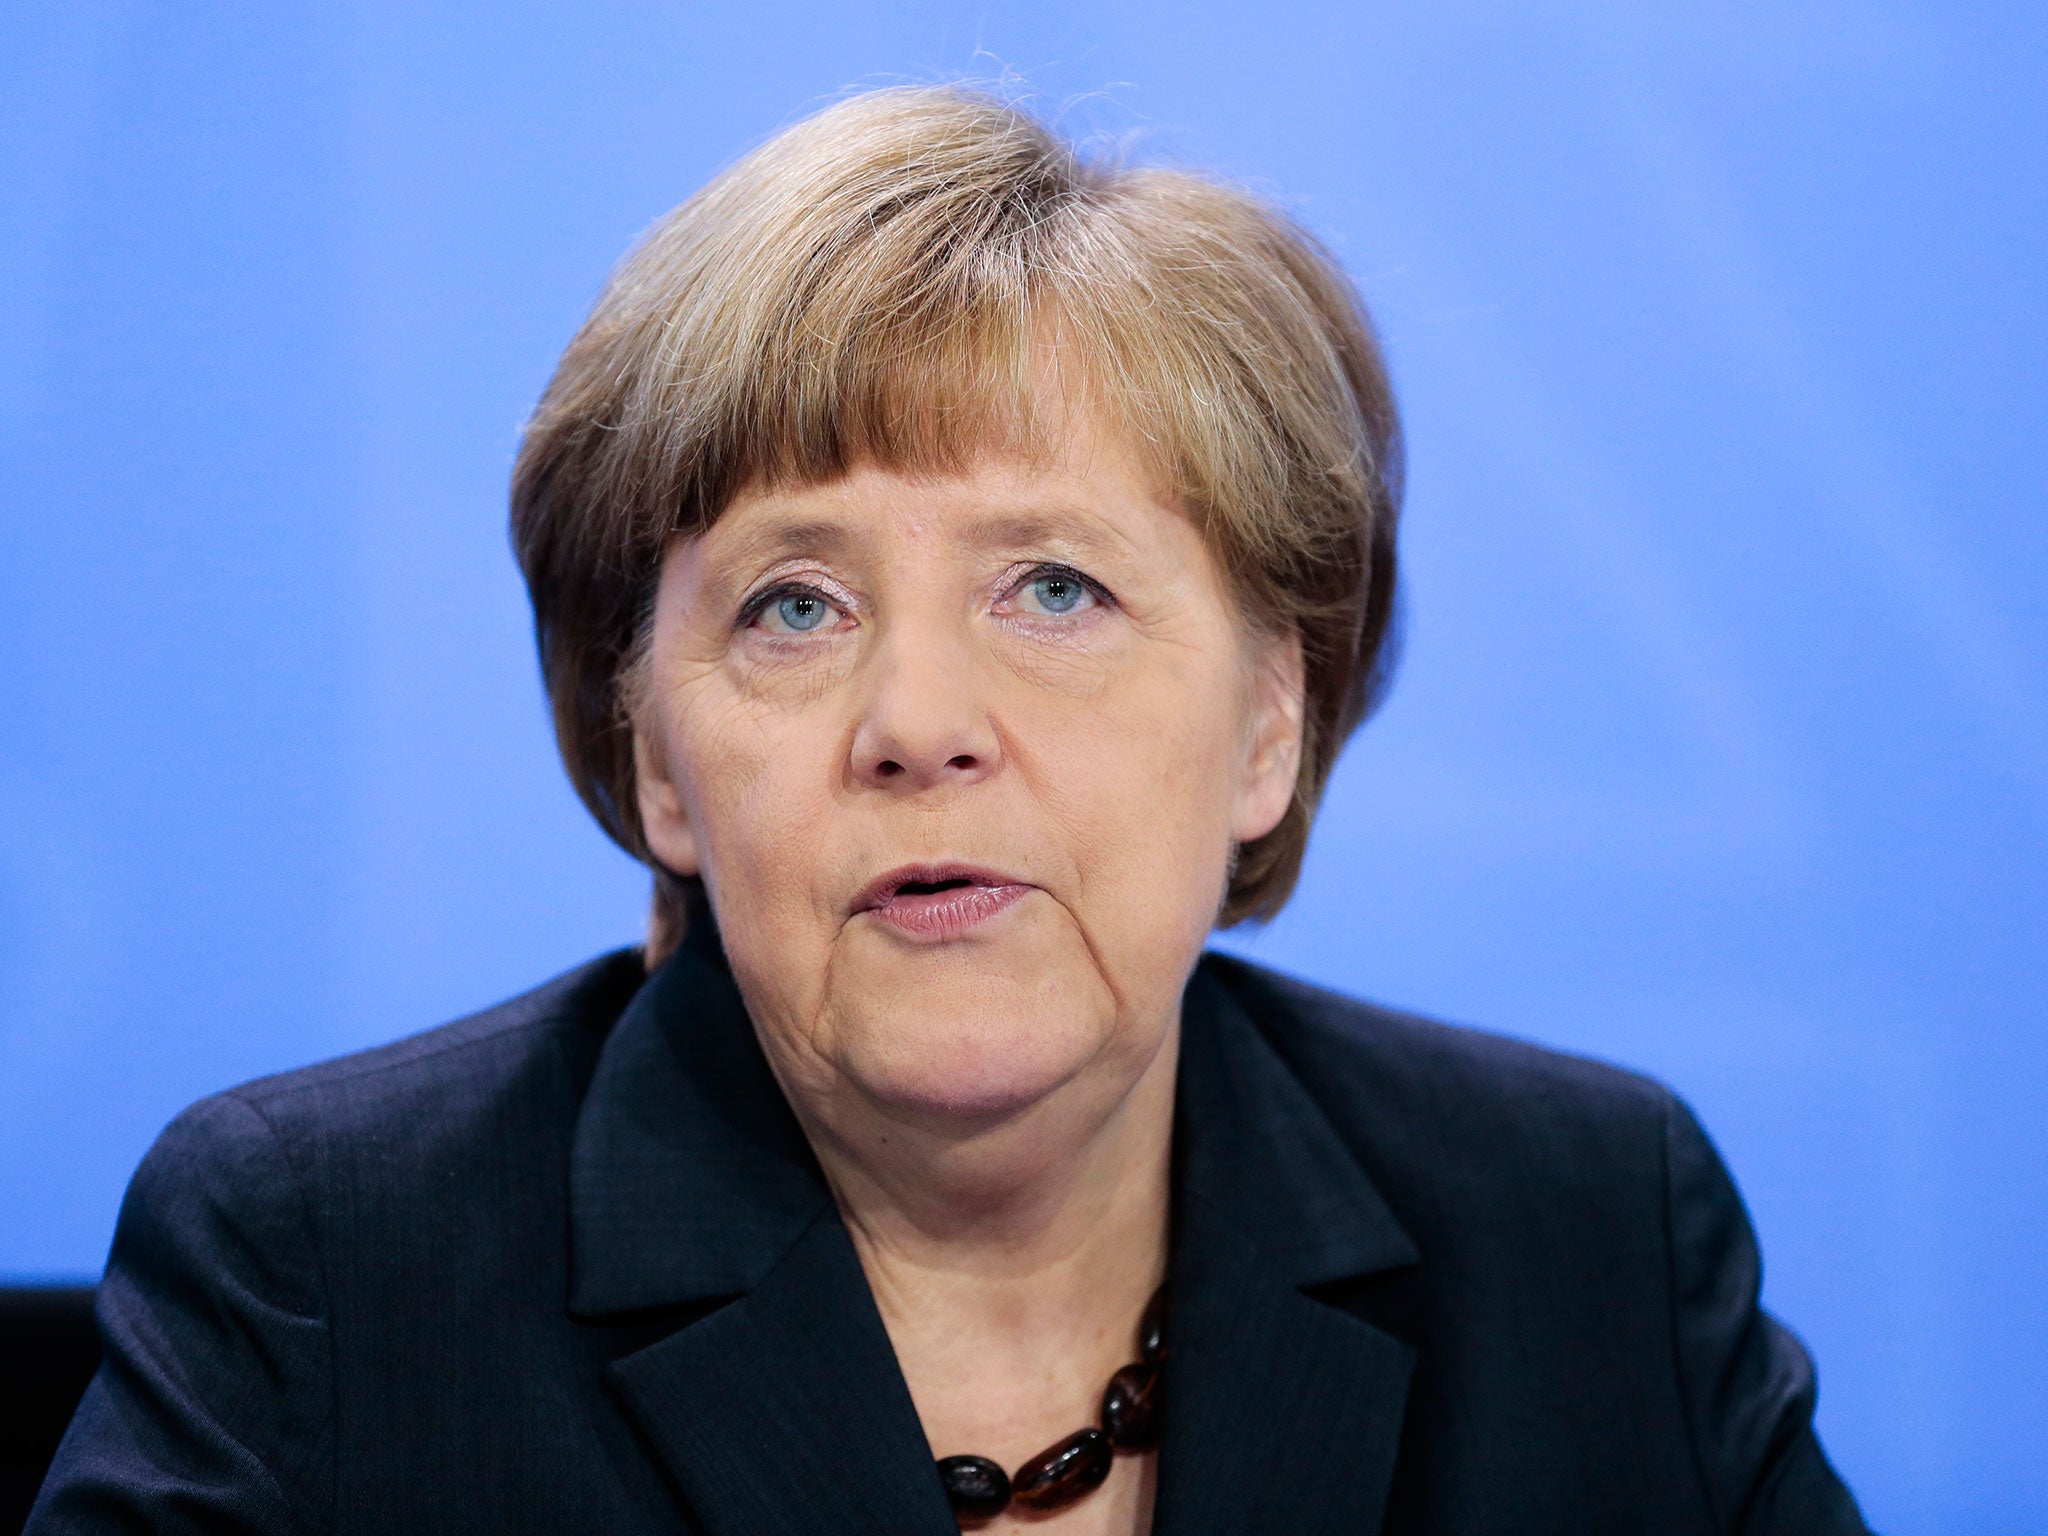 Chancellor Angela Merkel, pictured at a news conference yesterday, is said to have known about German co-operation with the NSA